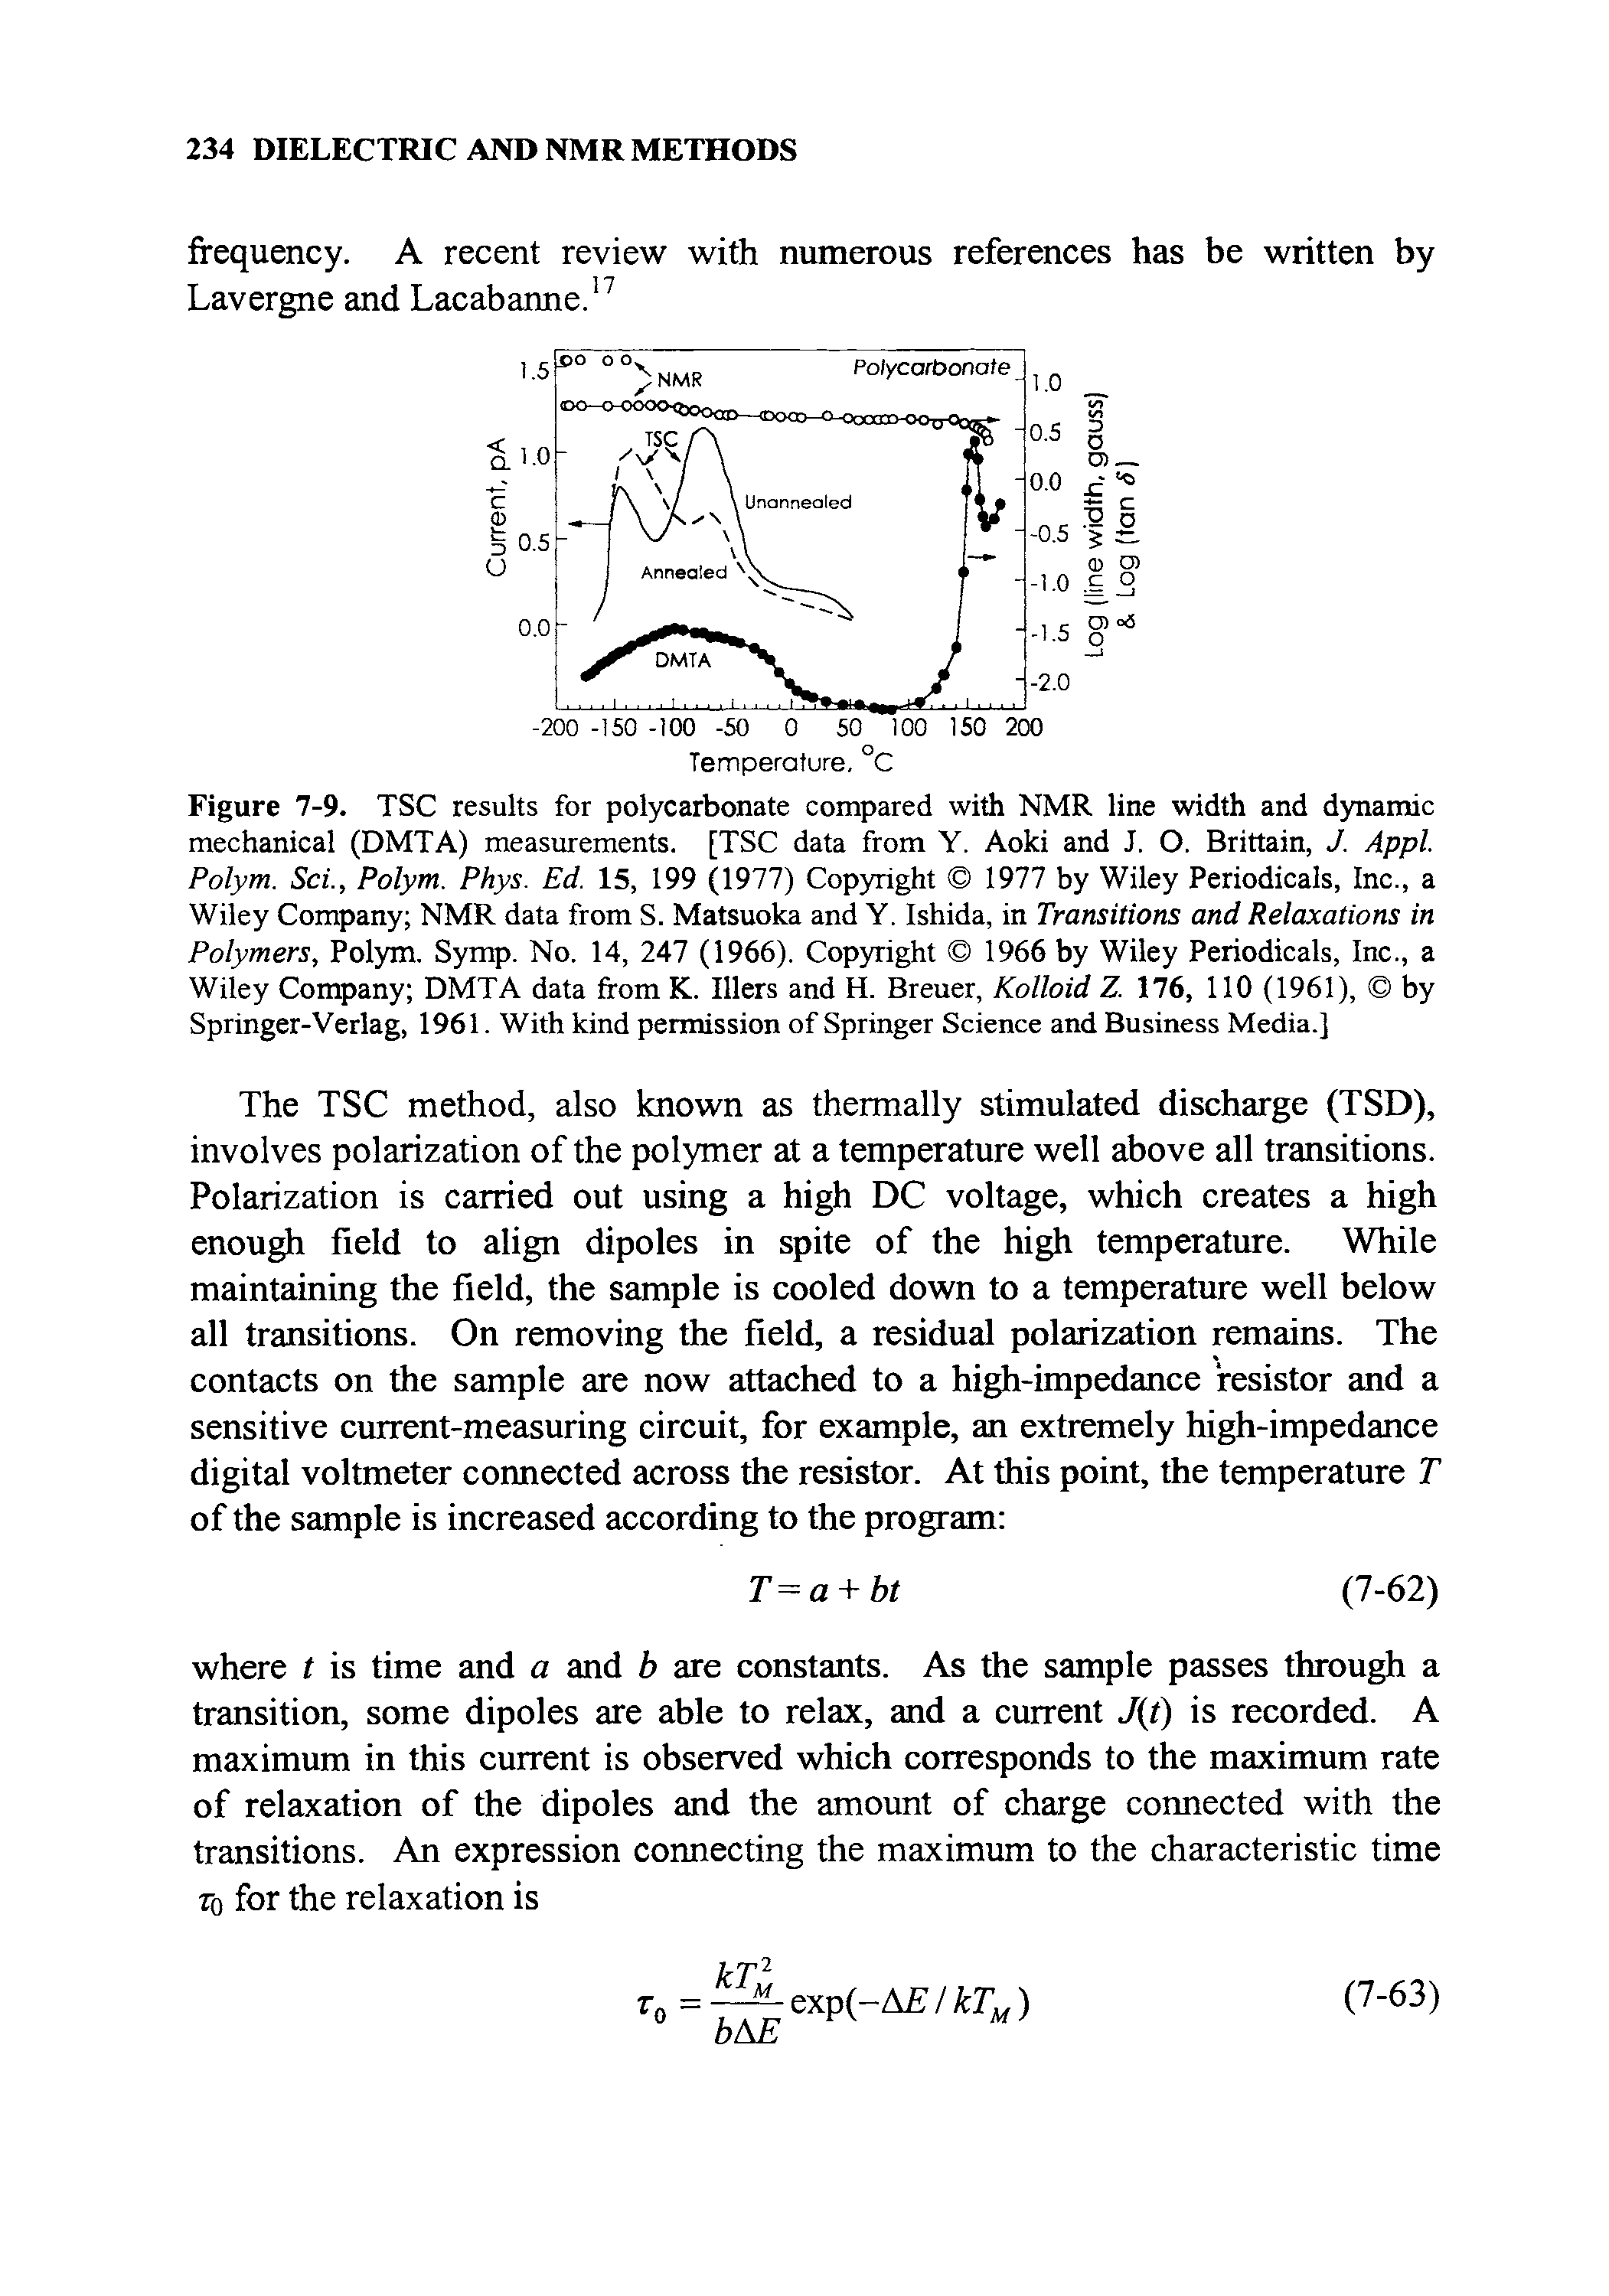 Figure 7-9. TSC results for polycarbonate compared with NMR line width and dynamic mechanical (DMTA) measurements. [TSC data from Y. Aoki and J. O. Brittain, J. Appl. Polym. Sci., Polym. Phys. Ed. 15, 199 (1977) Copyright 1977 by Wiley Periodicals, Inc., a Wiley Company NMR data from S. Matsuoka and Y. Ishida, in Transitions and Relaxations in Polymers, Polym. Symp. No. 14, 247 (1966). Copyright 1966 by Wiley Periodicals, Inc., a Wiley Company DMTA data from K. Illers and H. Breuer, Kolloid Z. 176, 110 (1961), by Springer-Verlag, 1961. With kind permission of Springer Science and Business Media.]...